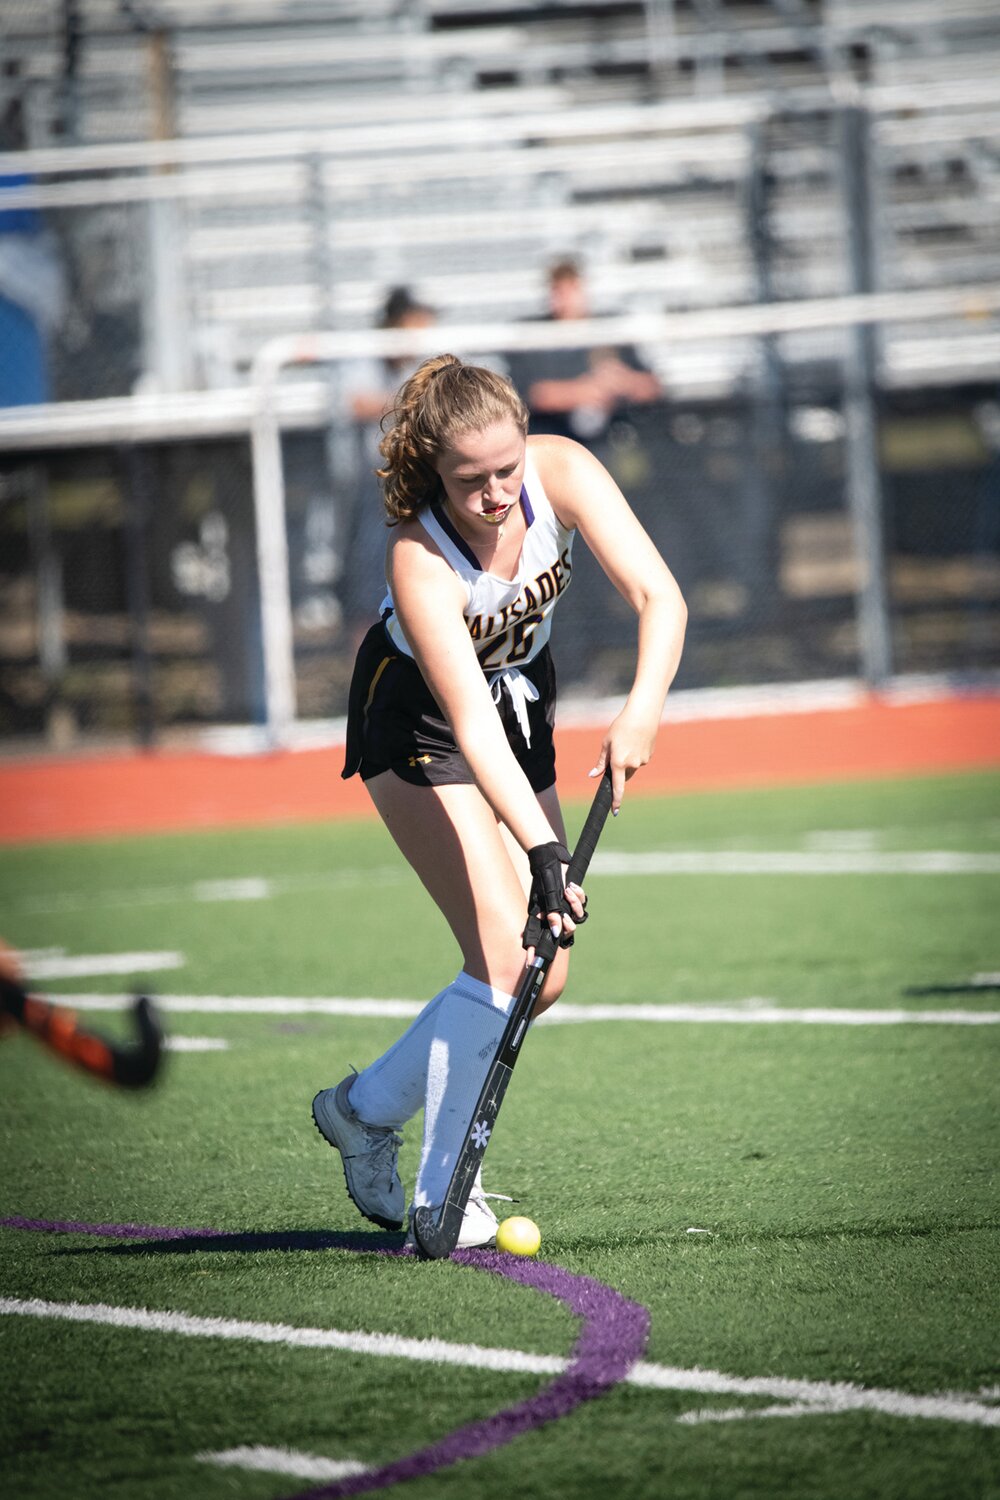 Palisades’ Abby Rider moves the ball across the field.